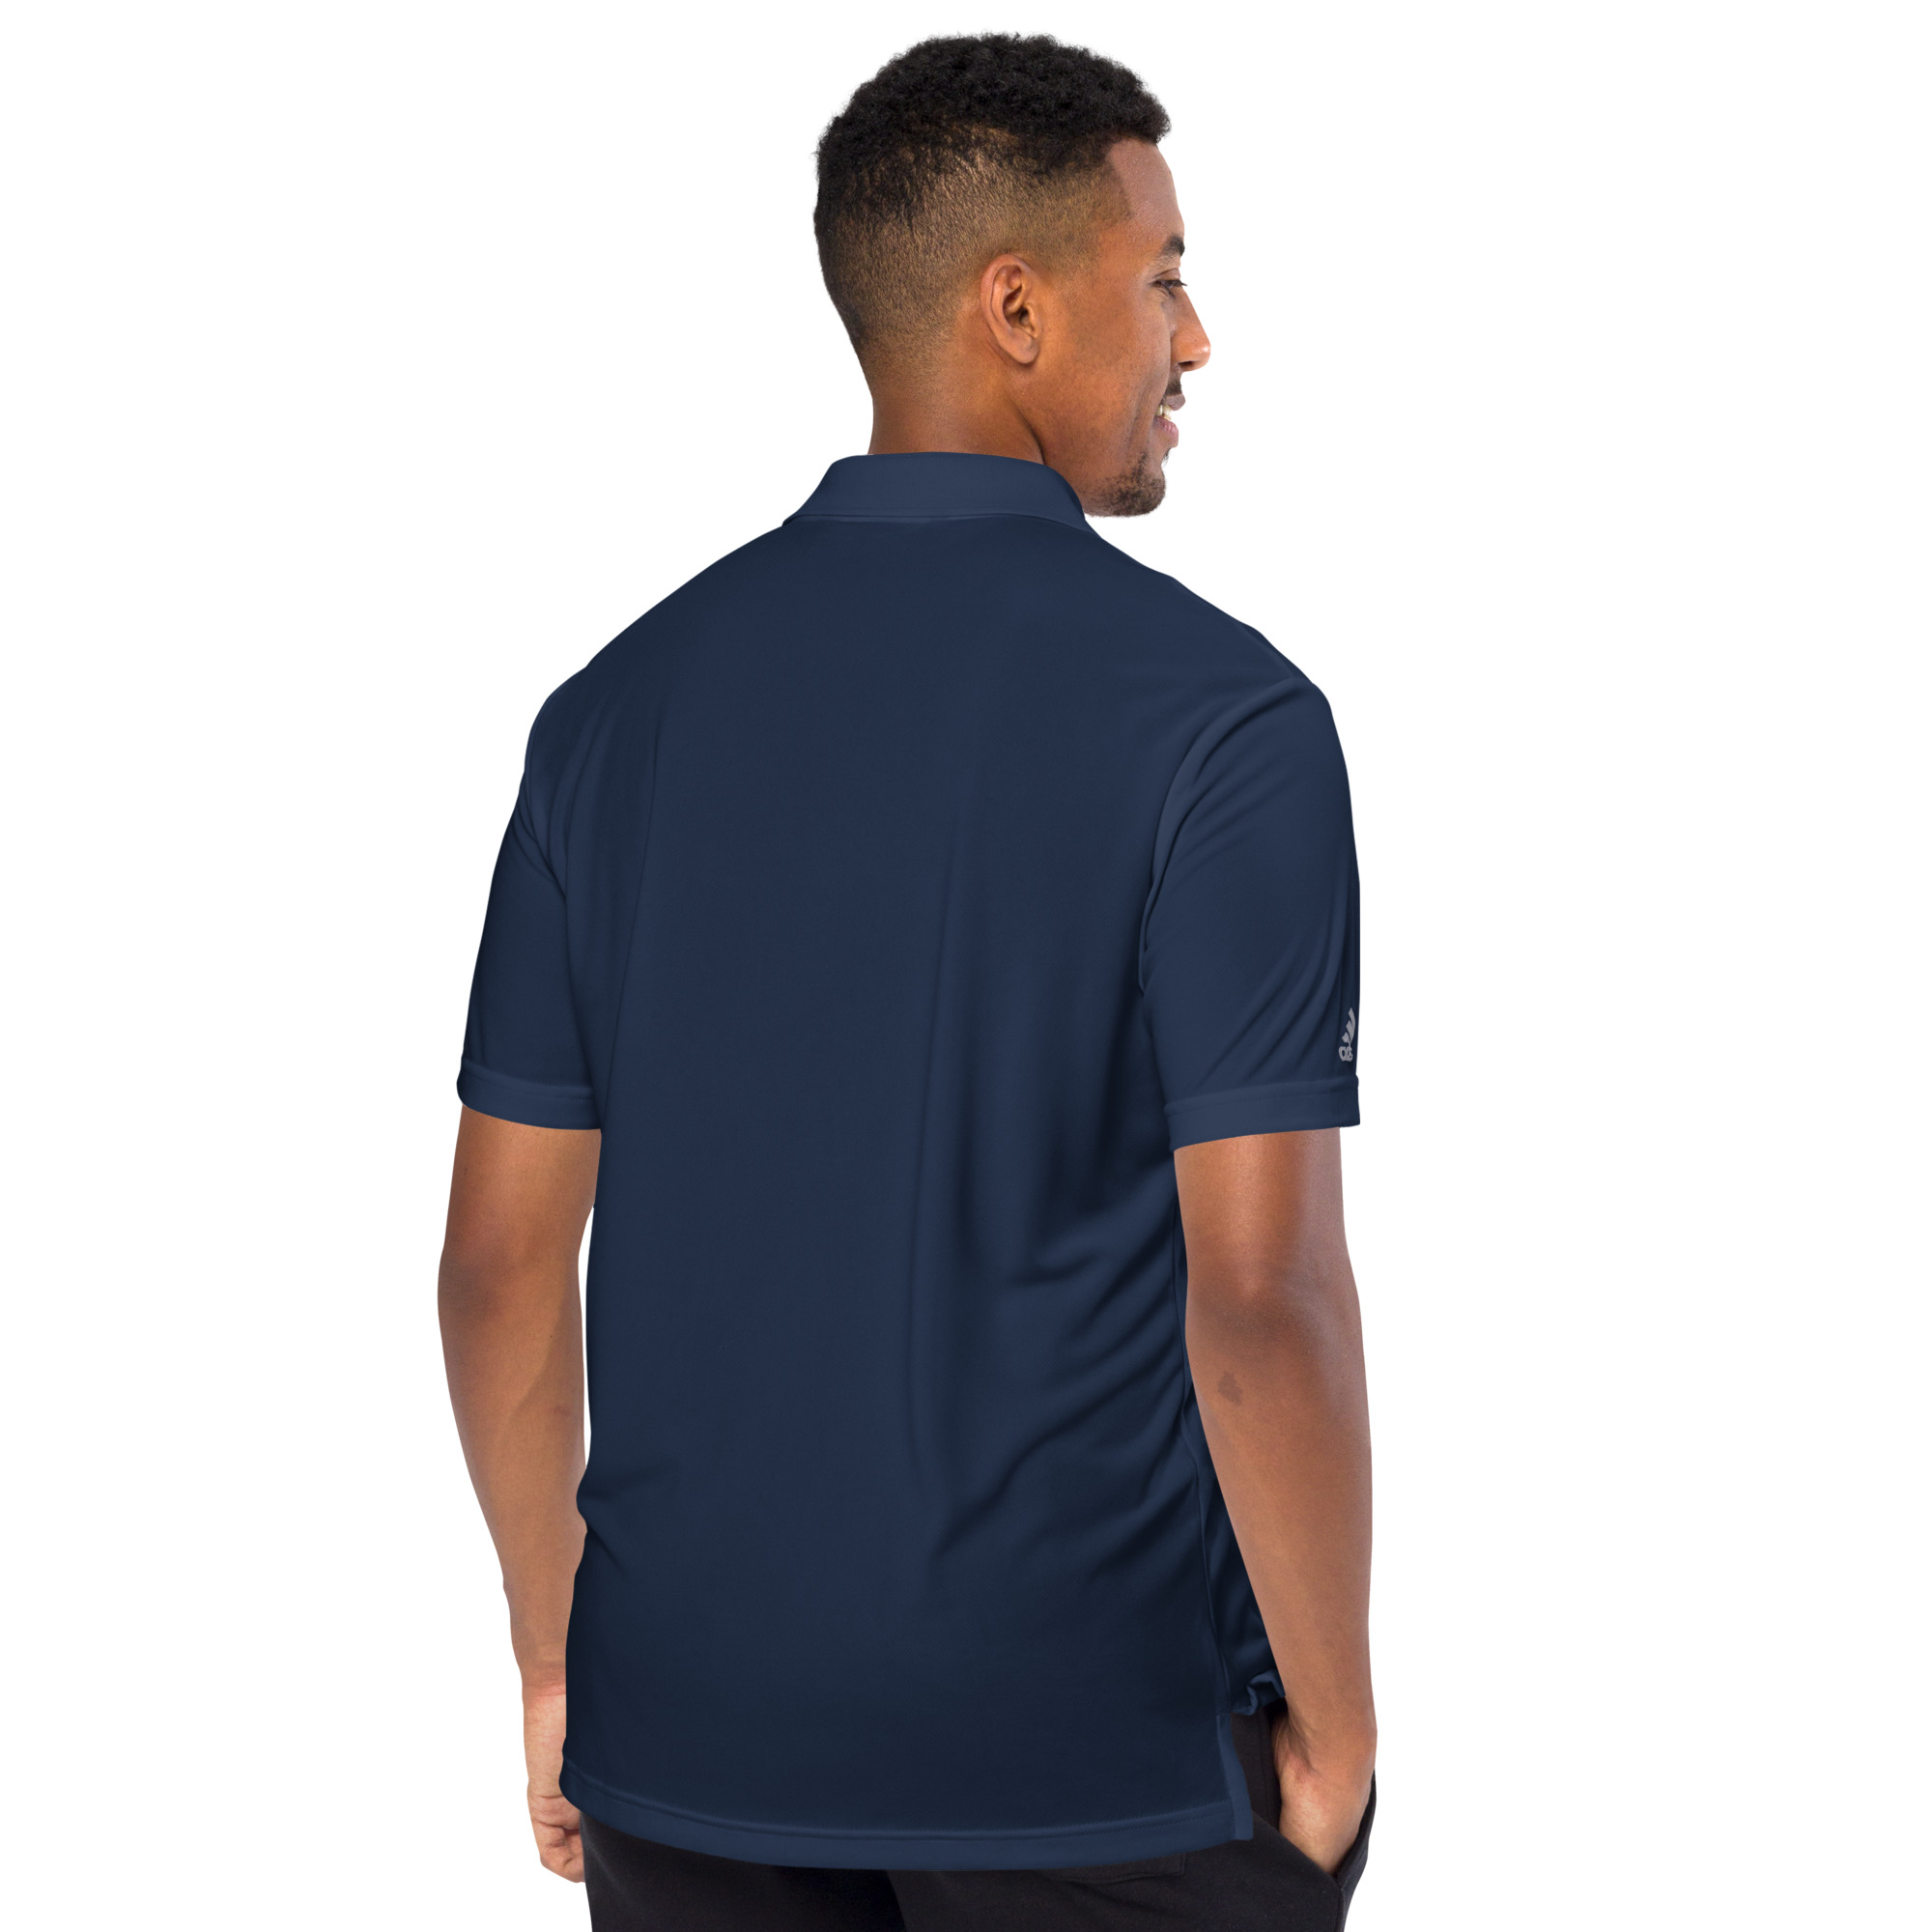 back view of a person wearing navy bitcoin adidas polo shirt